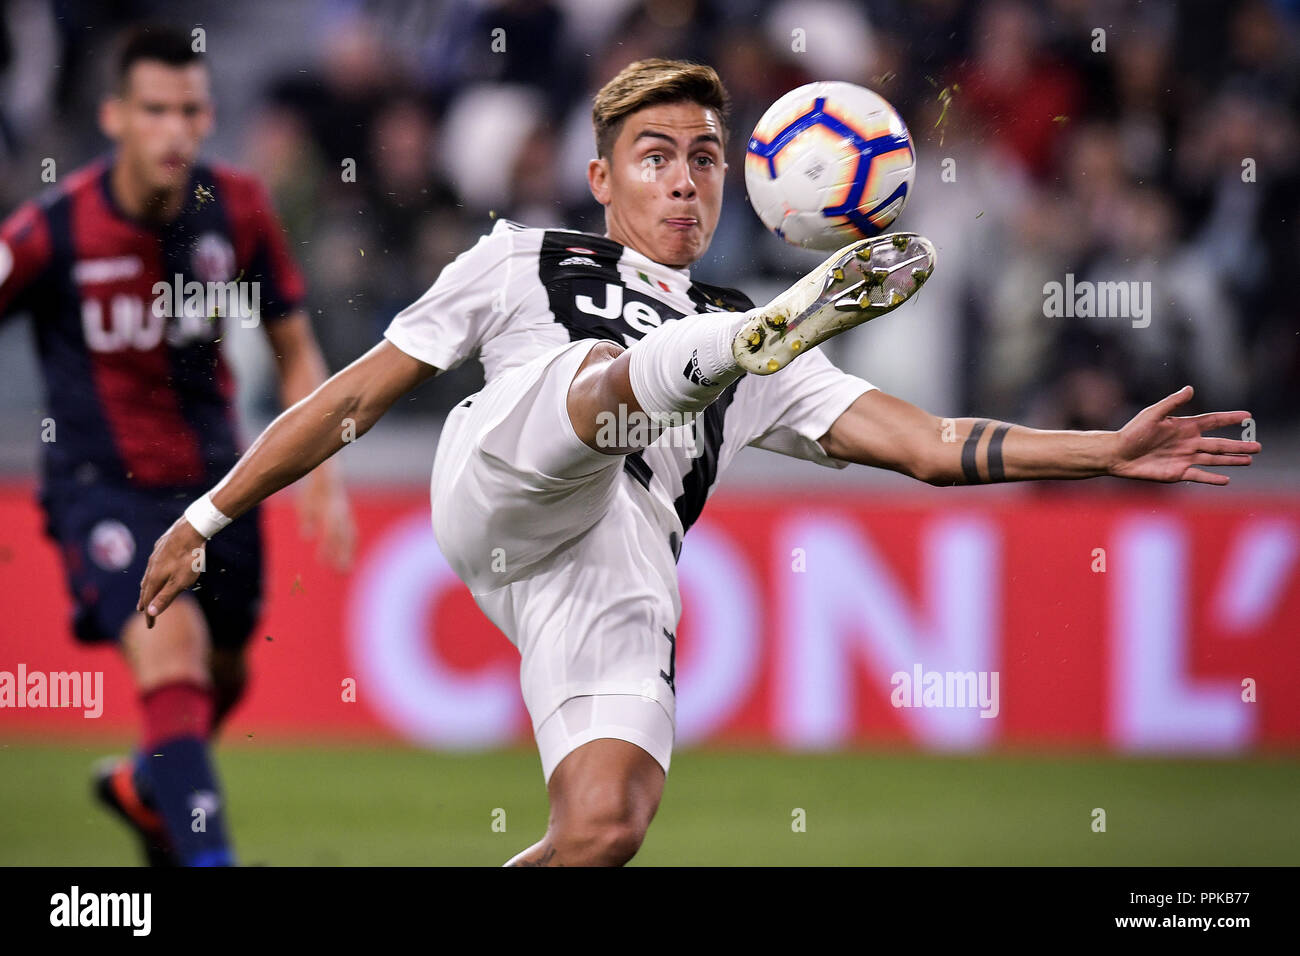 Juventus Bologna High Resolution Stock Photography and Images - Alamy